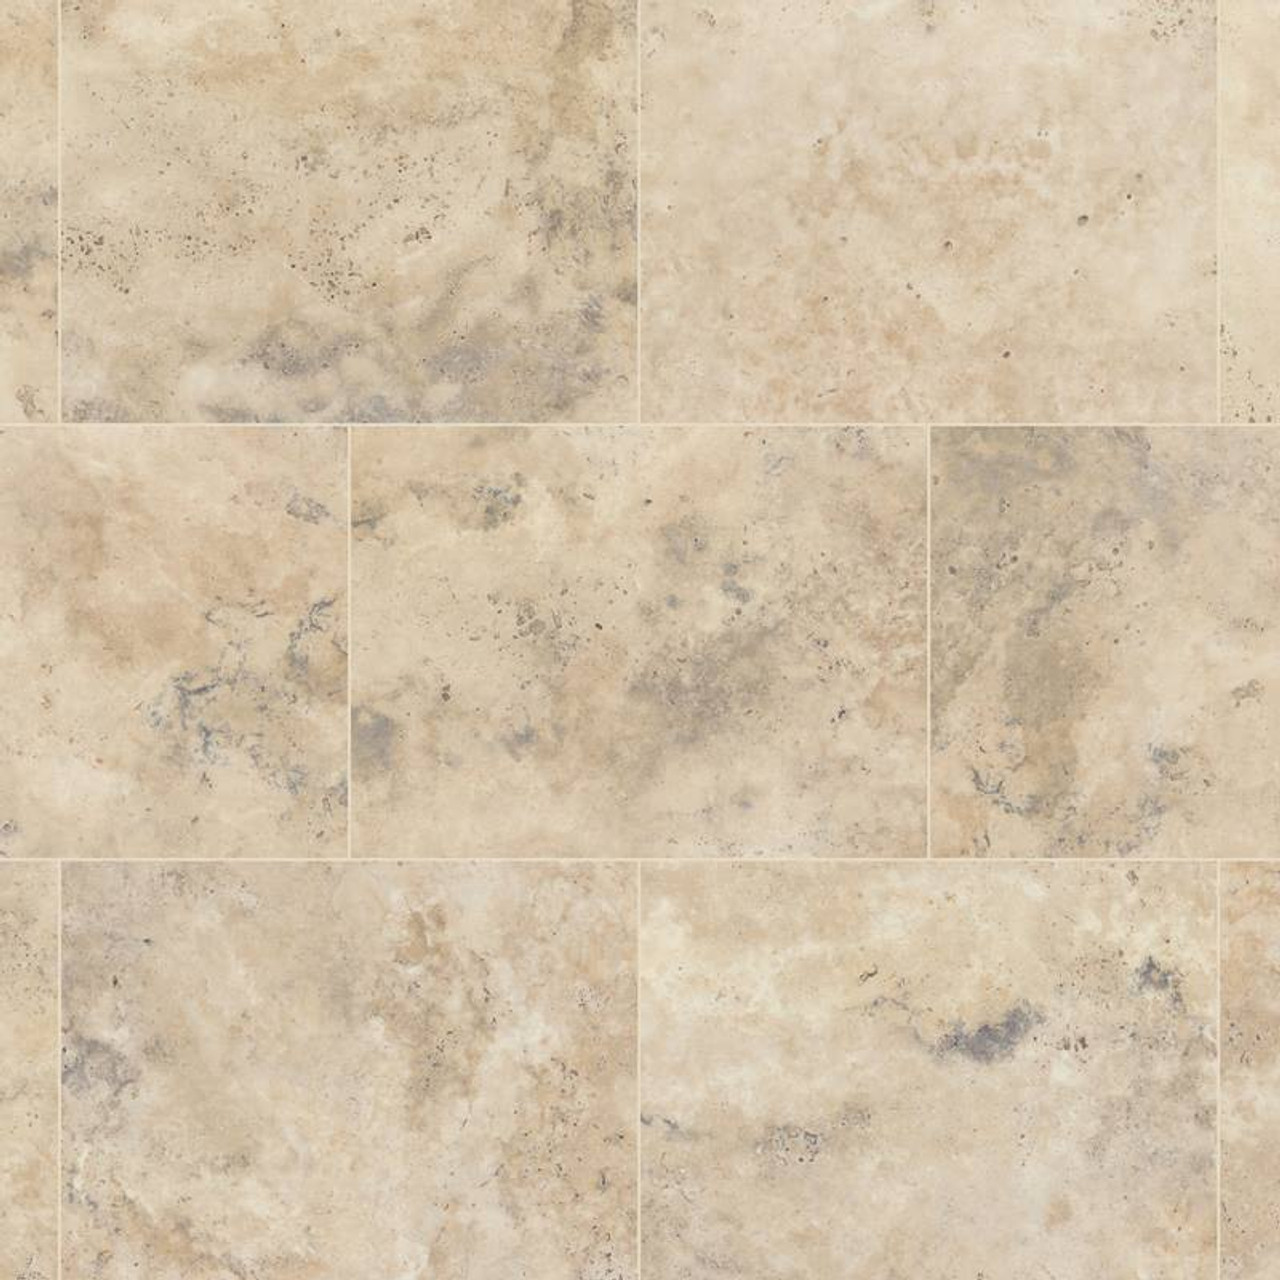 Travertine Flooring Pros and Cons